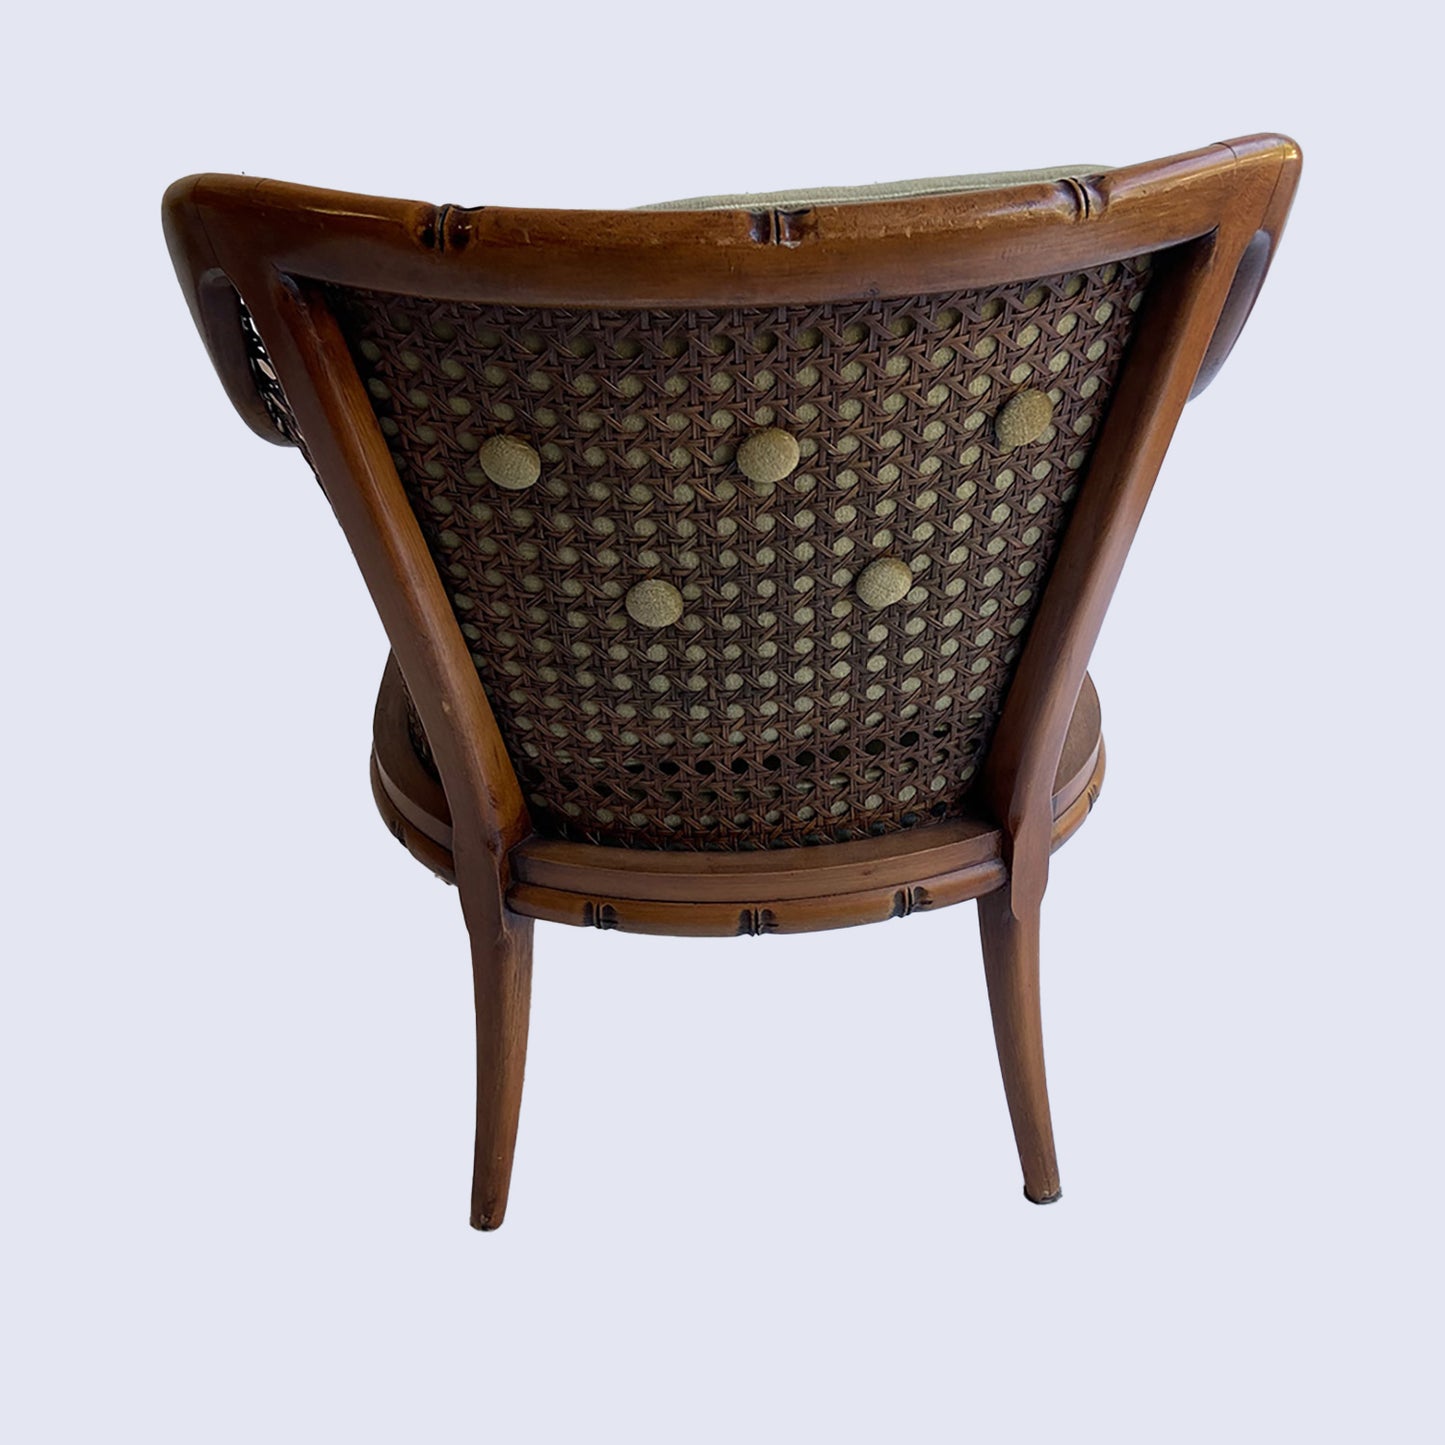 Giorgetti Hollywood Regency style faux bamboo chair, 1970 / 1980s, Italy